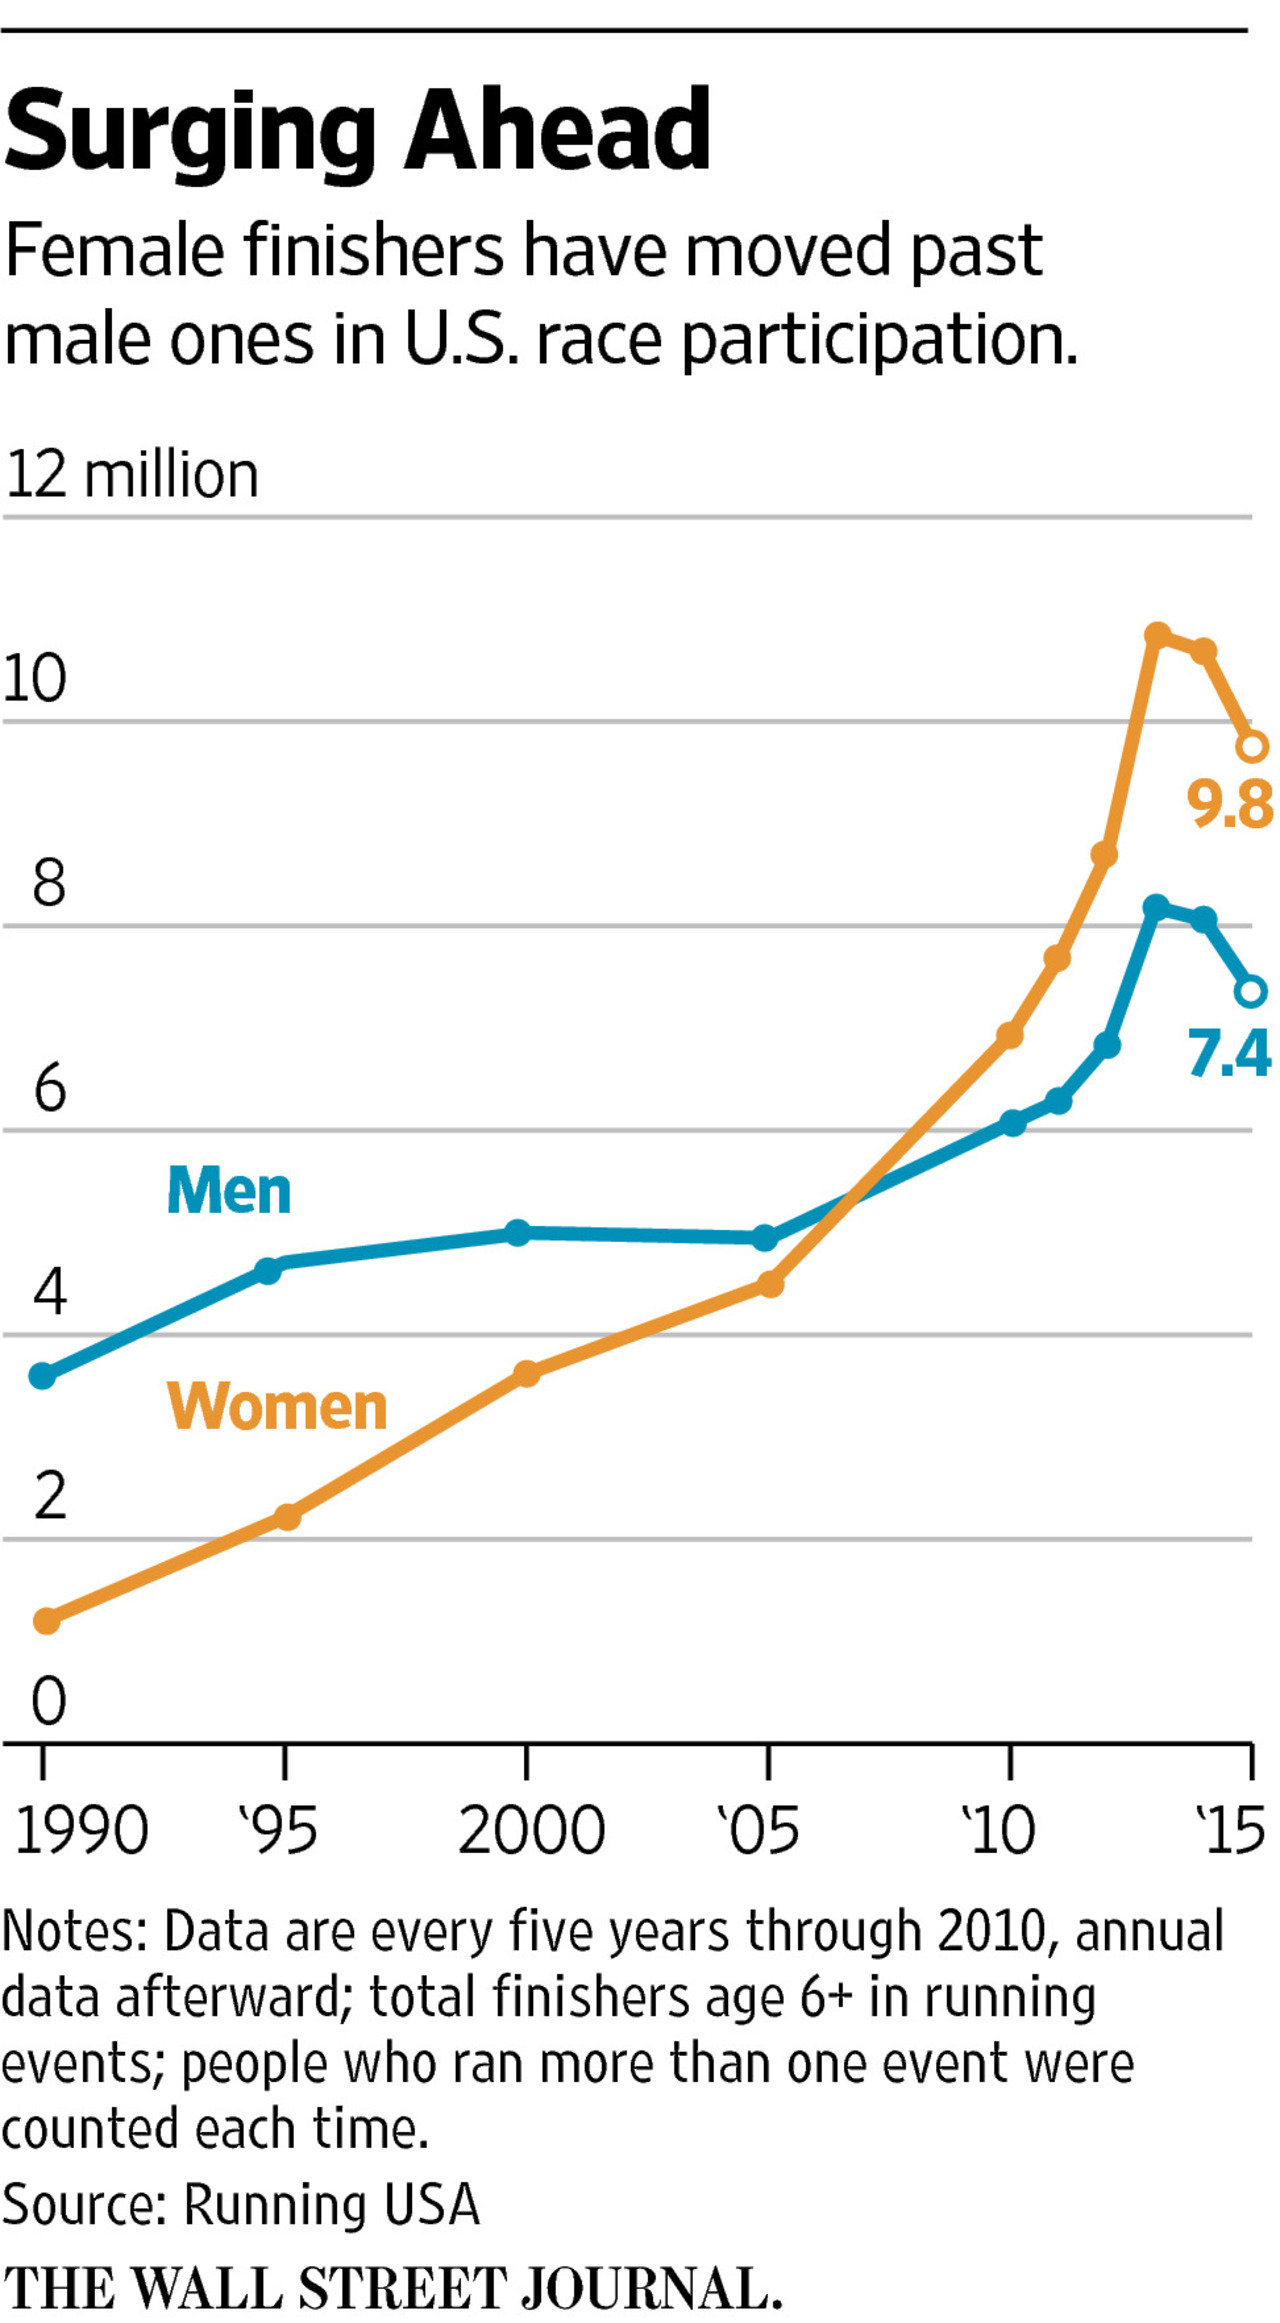 Chart. Female finishers have moved past males in U.S. race participation.